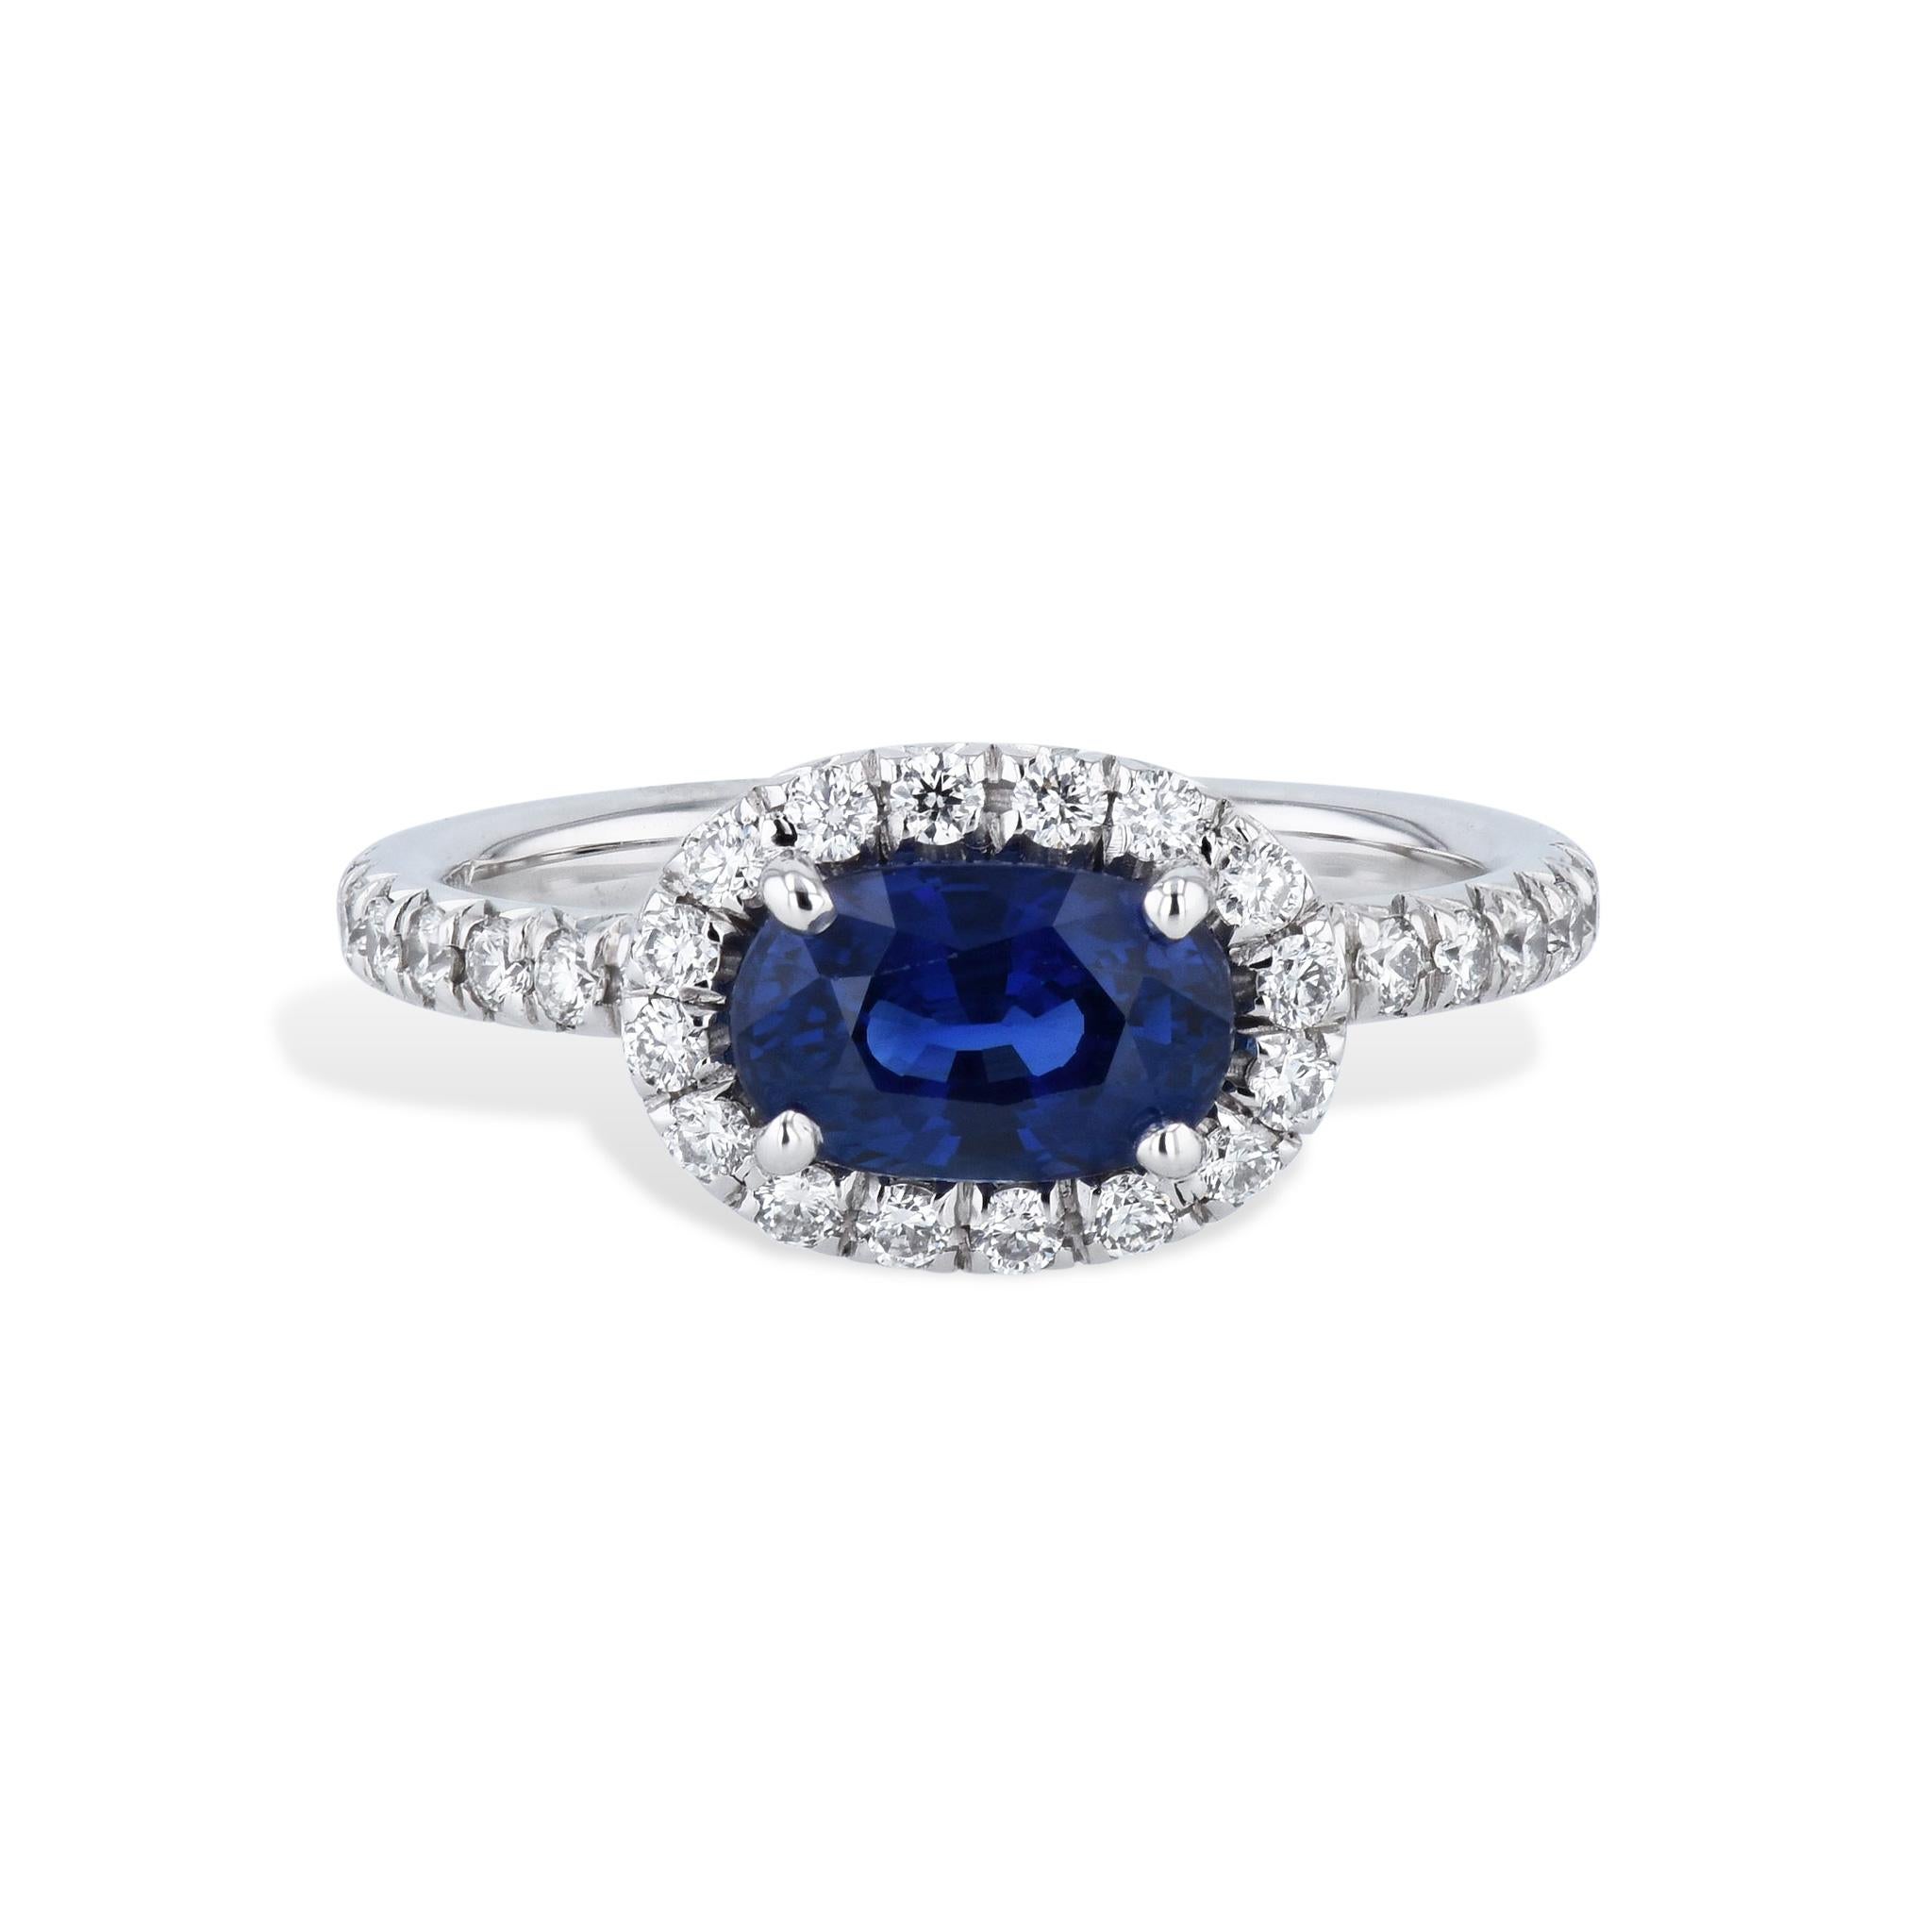 This stunning Royal Blue Sapphire Pave Diamond Ring has an oval-shaped 1.54 carat royal blue sapphire at its center. There is diamond pave set around the center stone as well as along the shank. 
This is a handmade, one of a kind ring crafted in 18